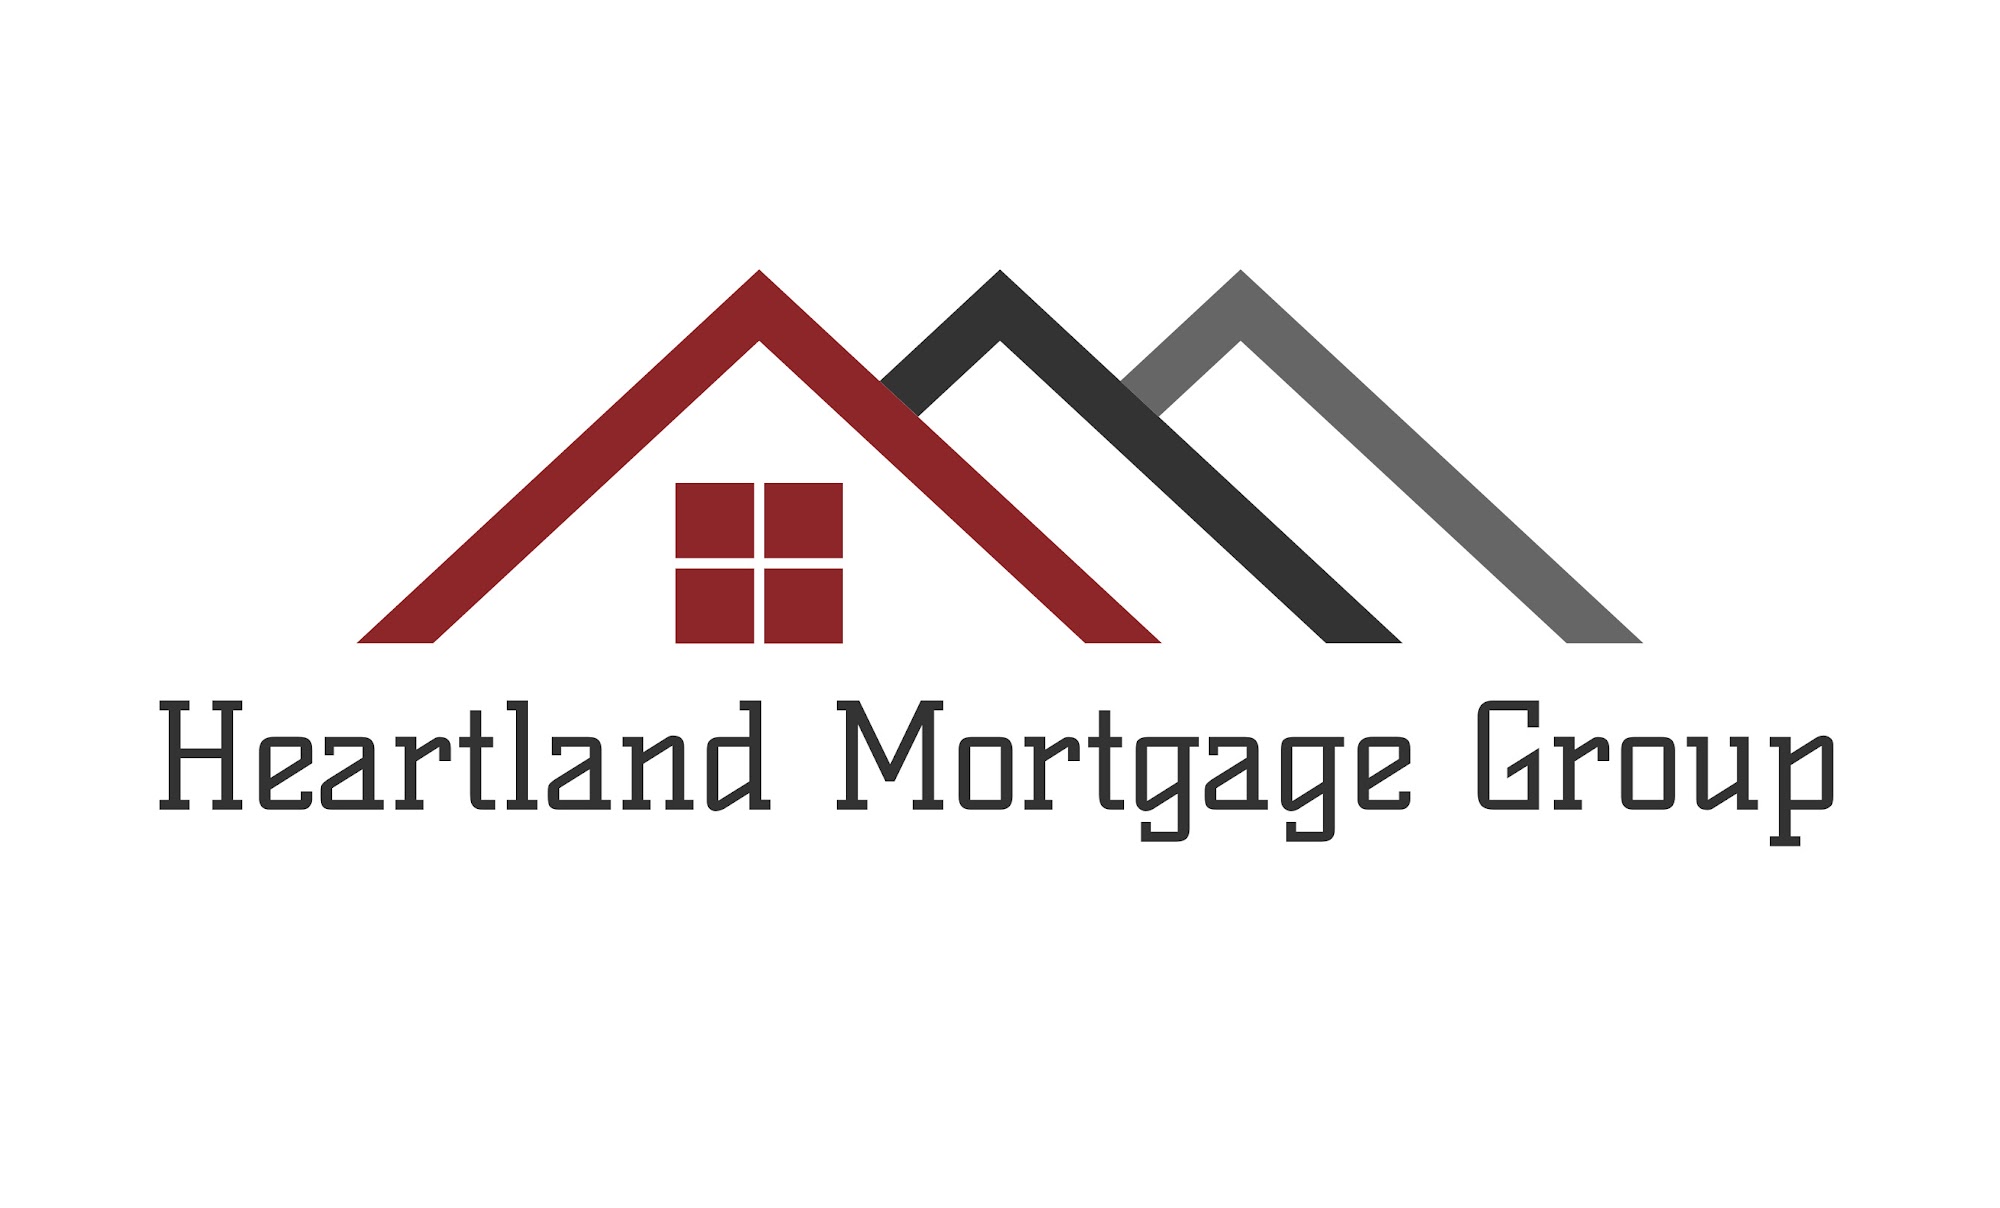 Logan Beck, Heartland Mortgage Group 3204 S County Rd 550 W, Coatesville Indiana 46121